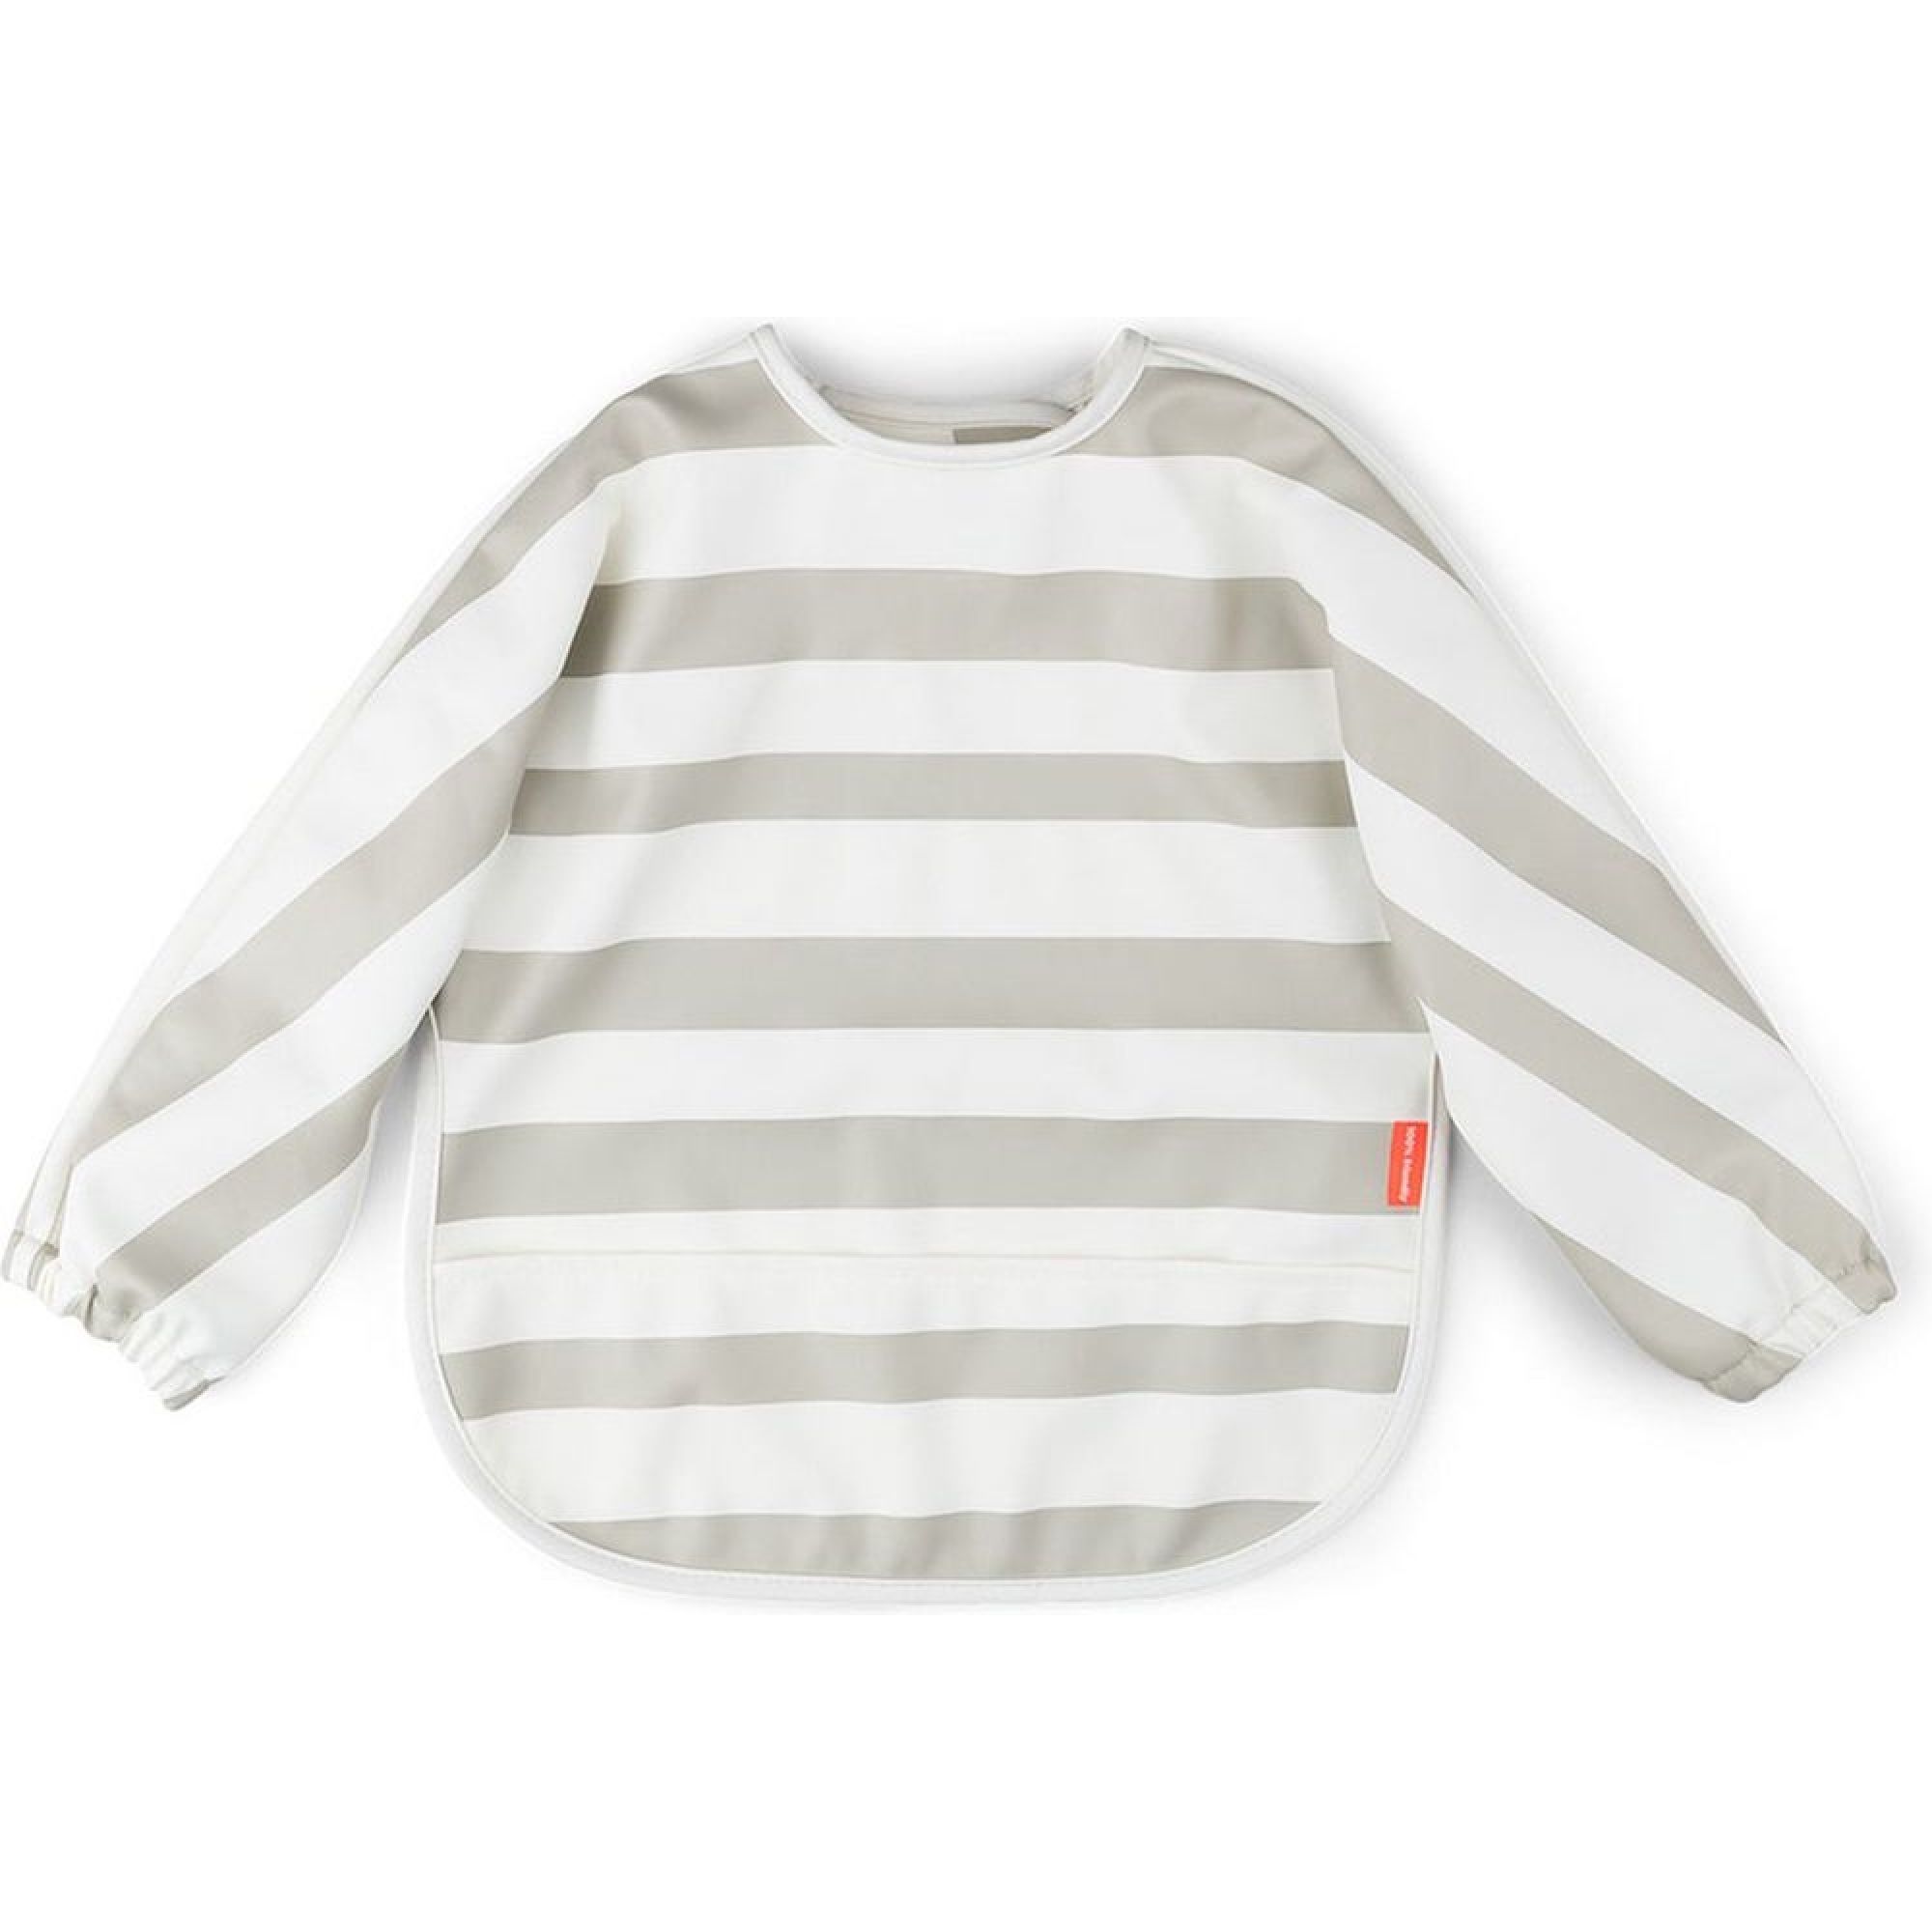 https://www.madeinbebe.com/boutique/uploads/articles/zoom/bavoir-a-manches-avec-poche-stripes-sable-done-by-deer_OA.jpg